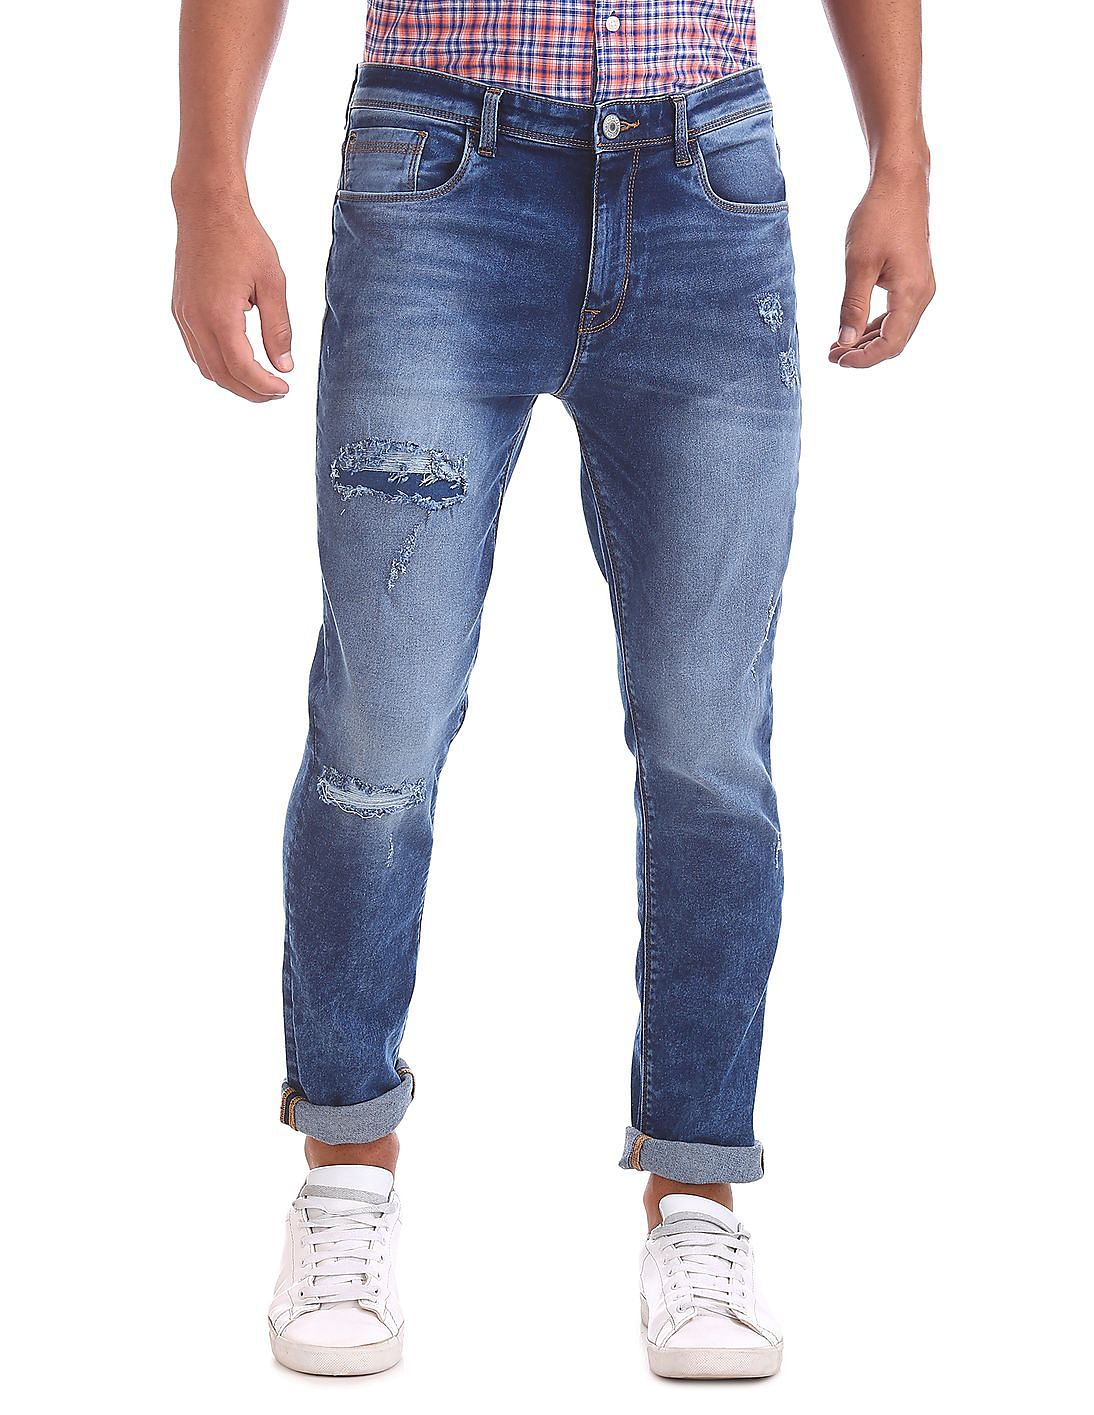 torn jeans online shopping